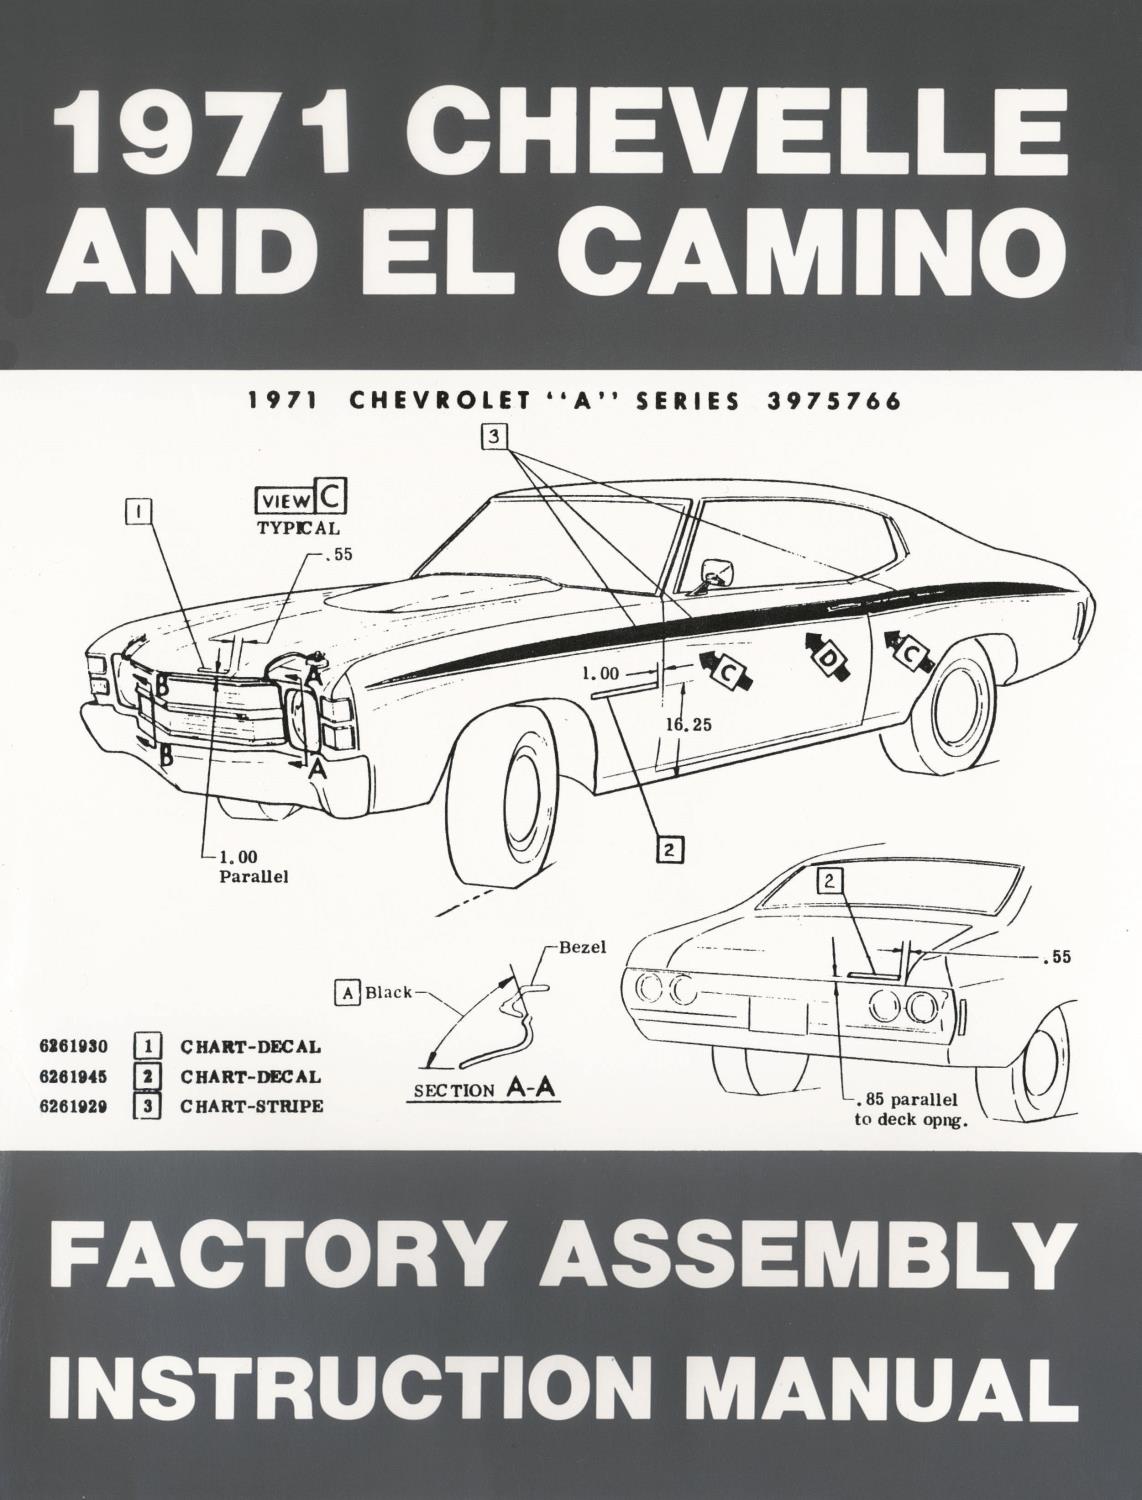 Factory Assembly Instruction Manual for 1971 Chevrolet Chevelle and El Camino